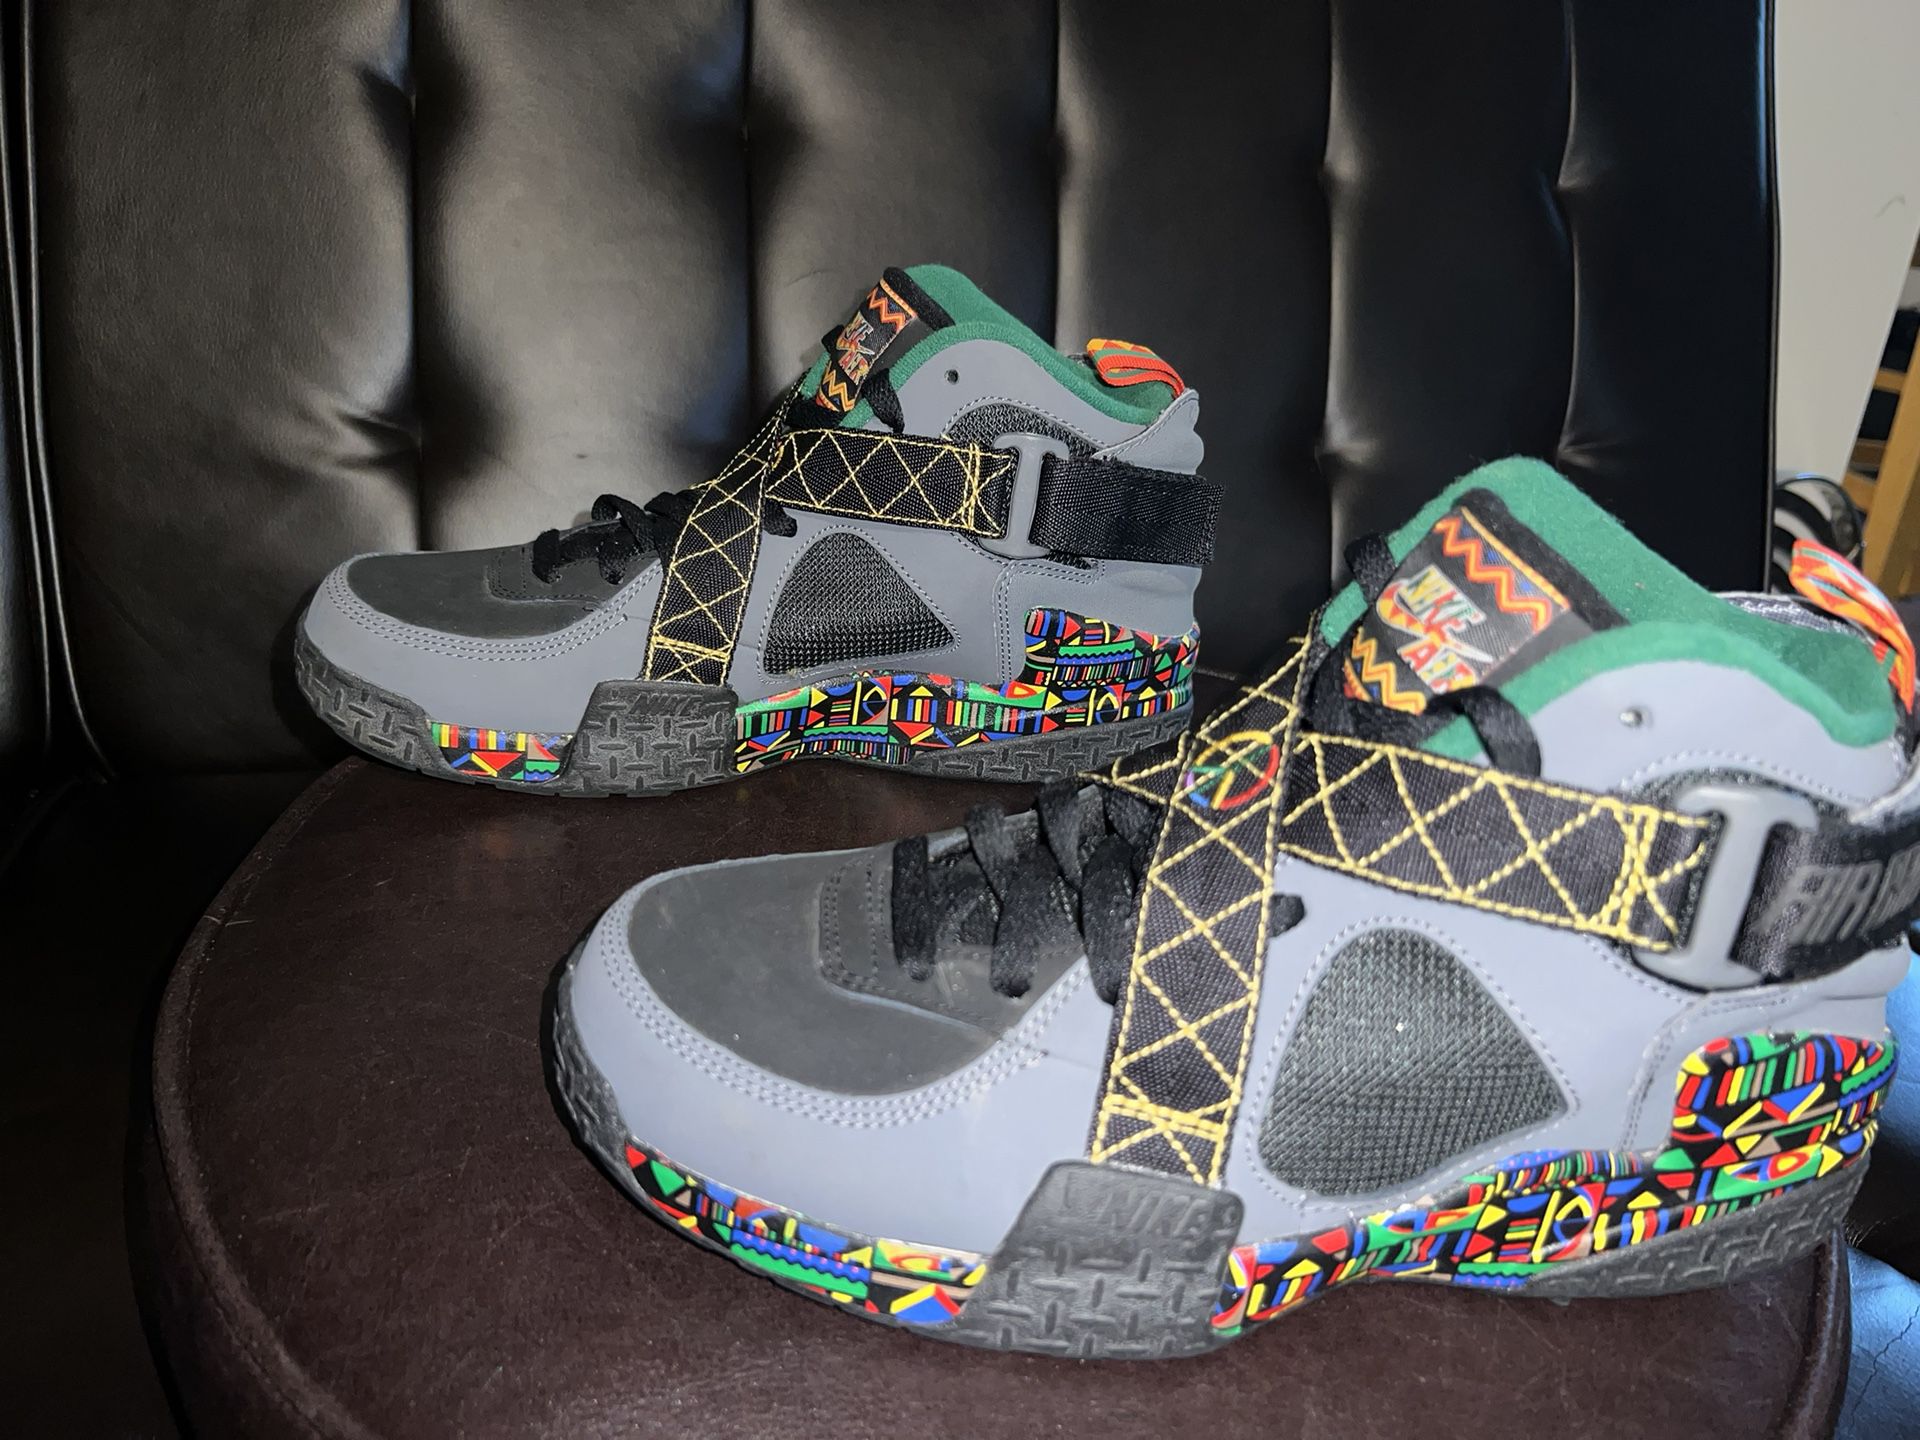 1993 Nike Air Raid 2 for Sale in Tacoma, WA - OfferUp